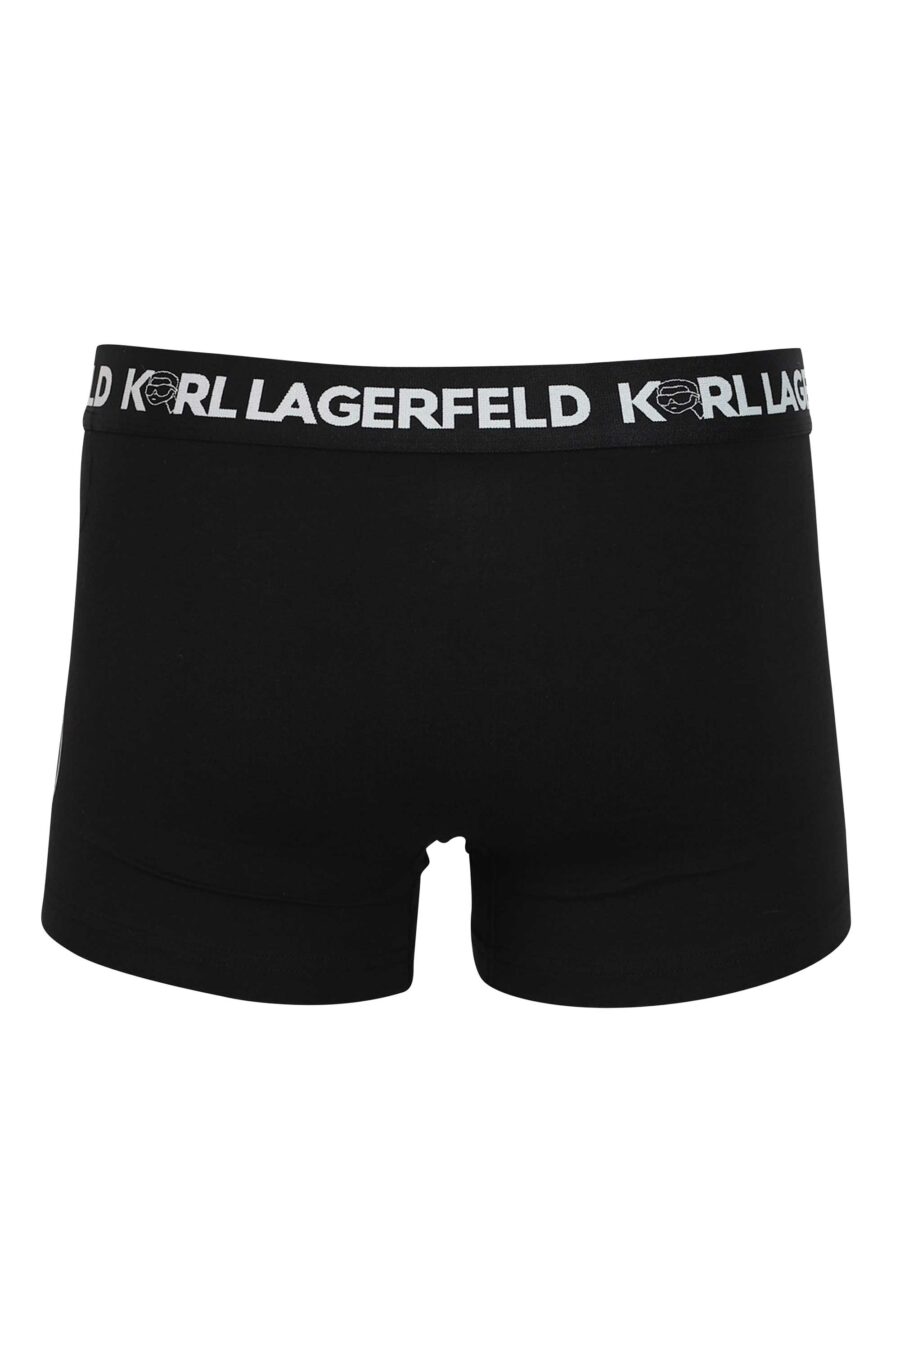 Pack of three black boxers with different "karl" prints - 8720744054580 6